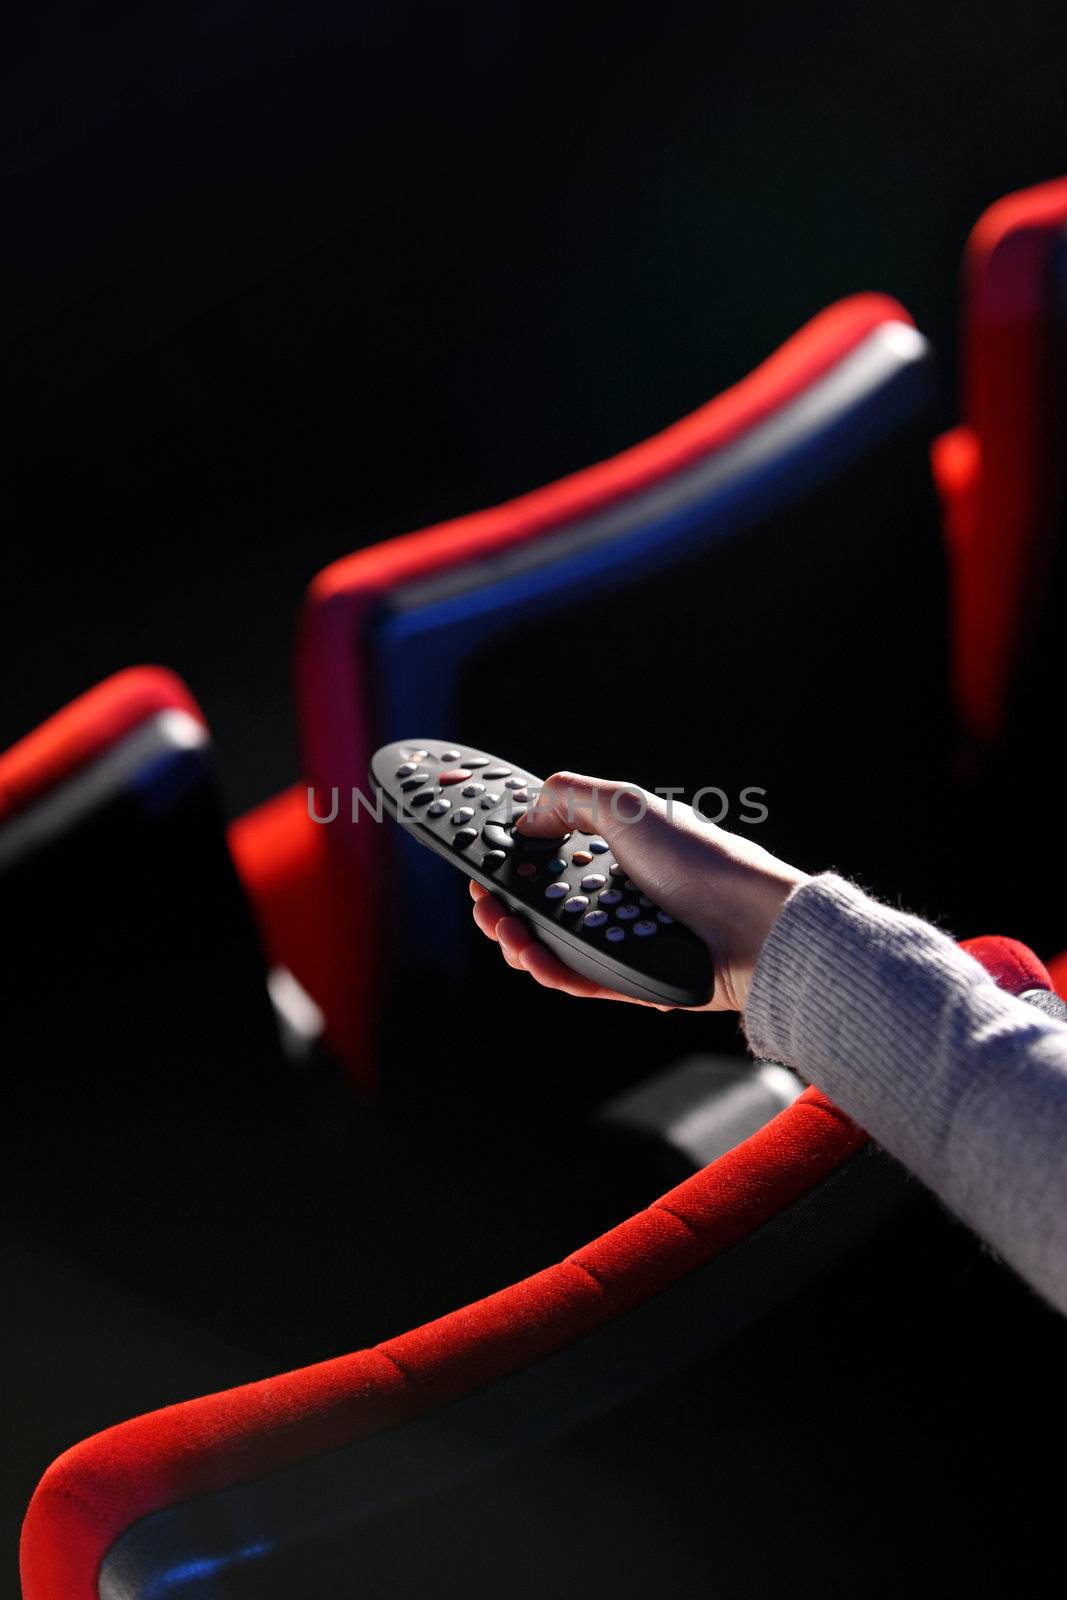 closeup of a hand holding a remote control TV, in the background you can see the red chairs in a movie theater. conceptual image